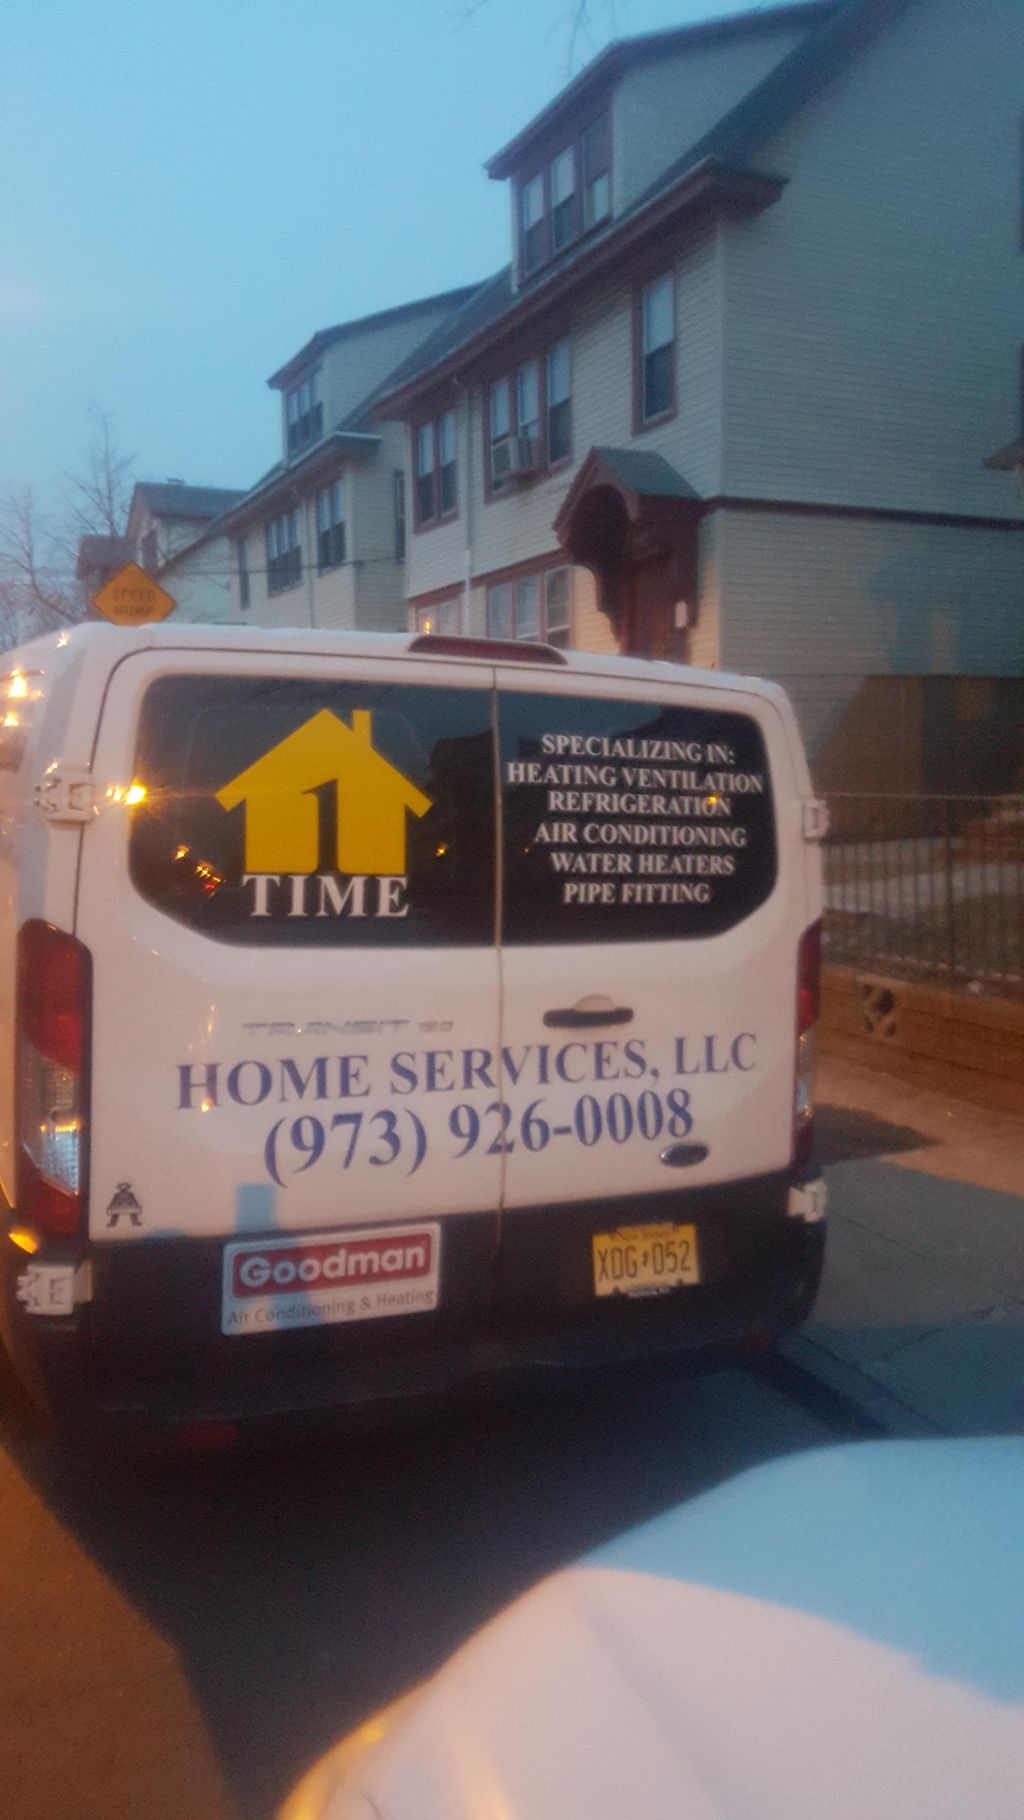 One Time Home Services LLC